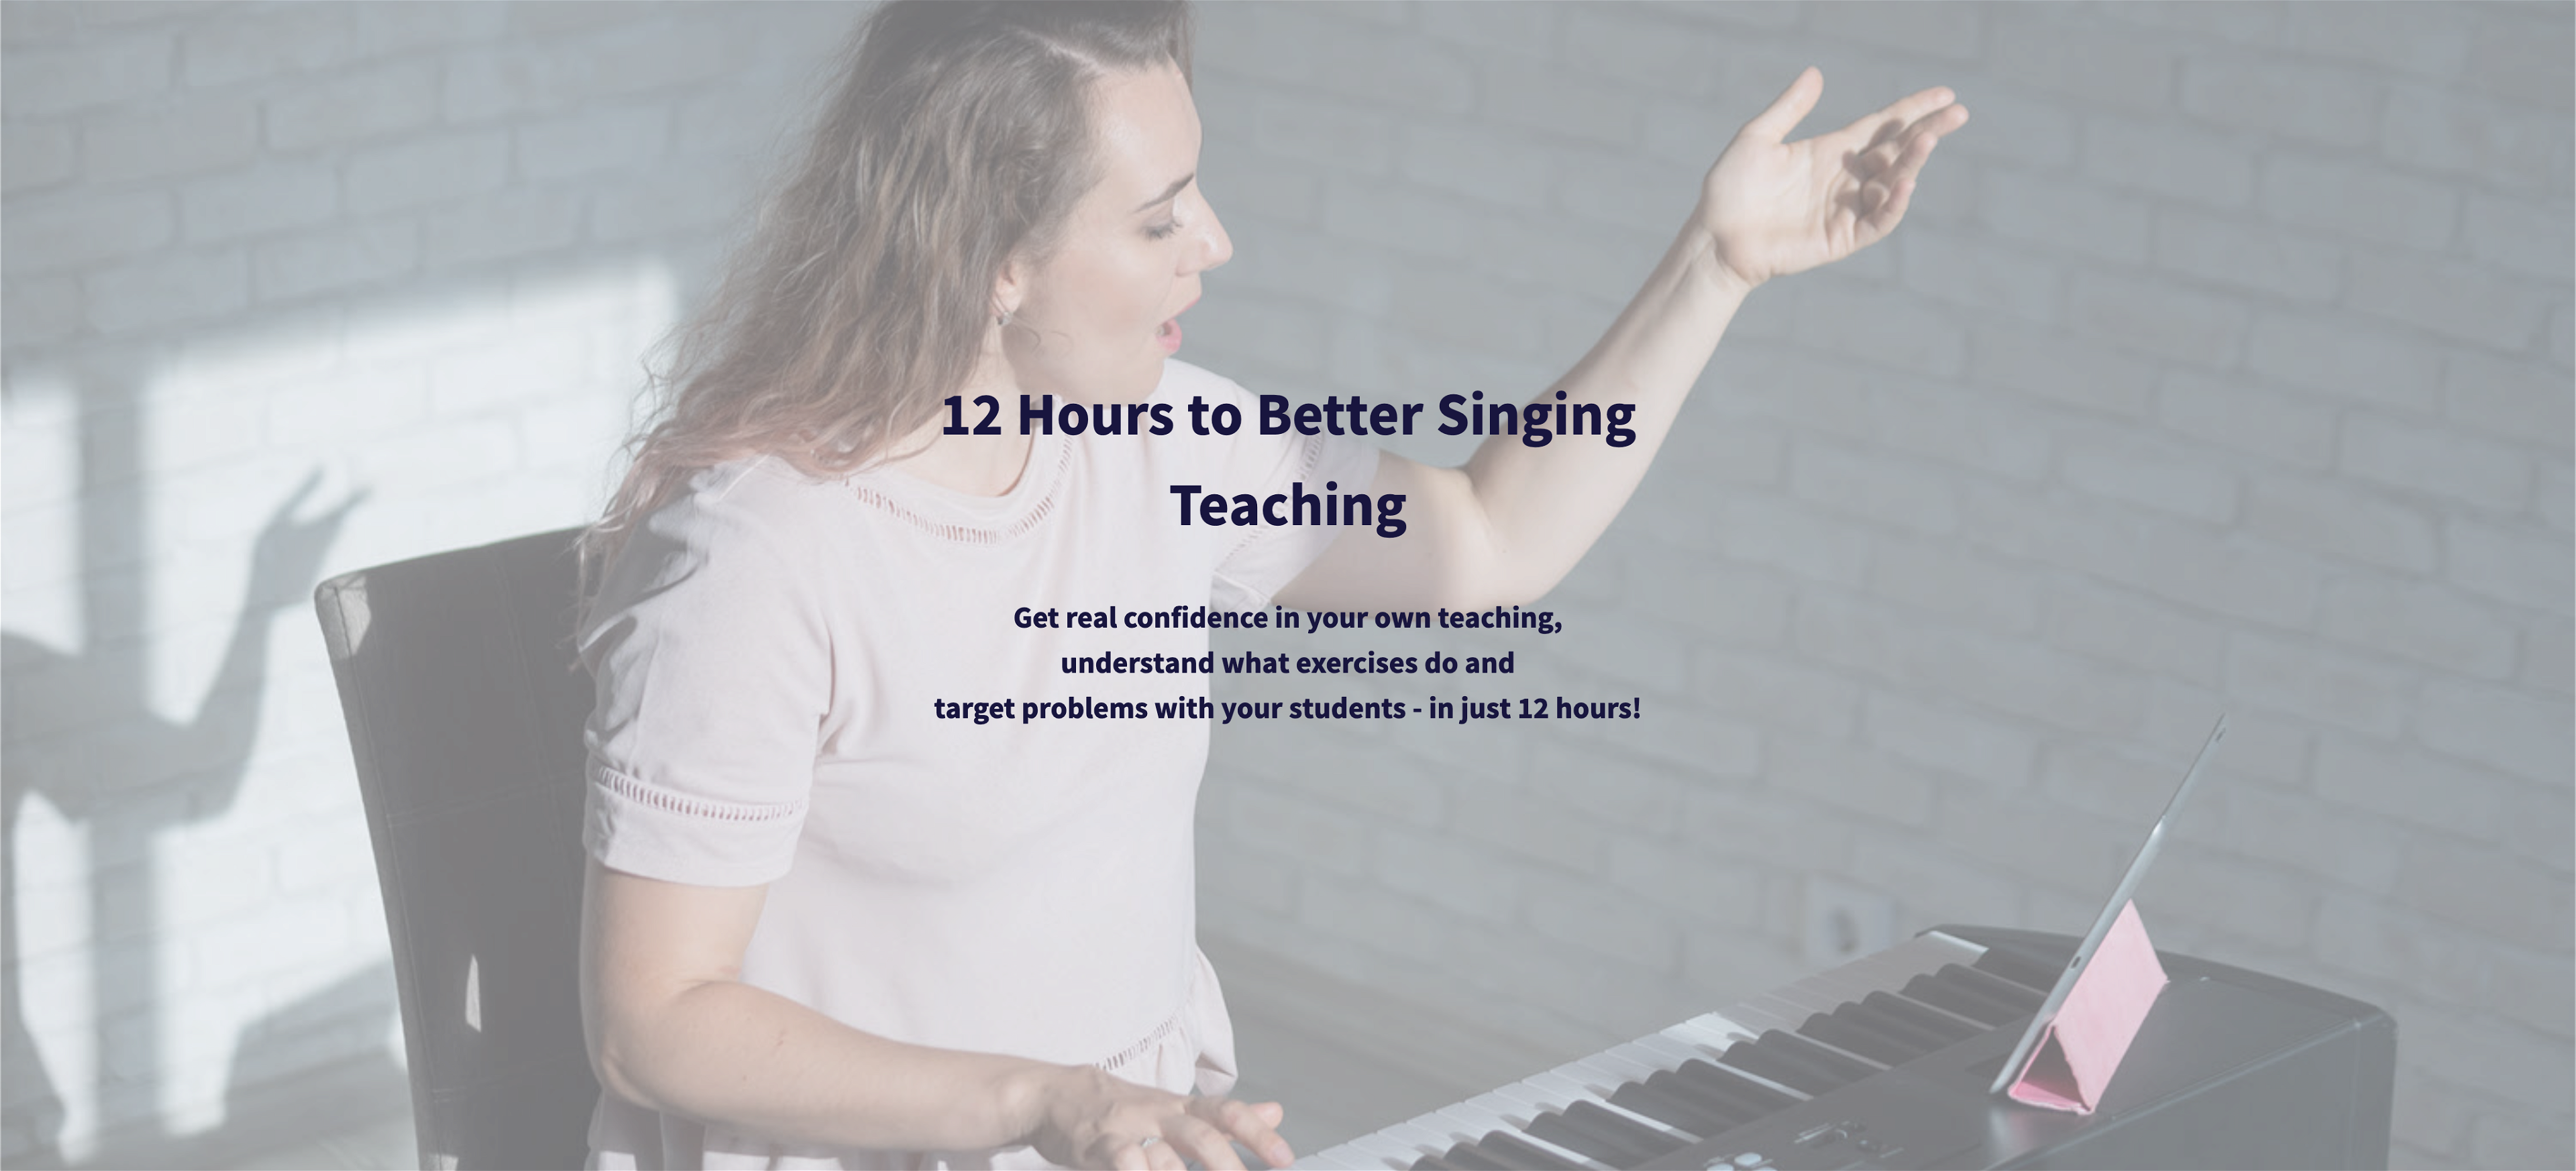 12 Hours to Better Singing Teaching